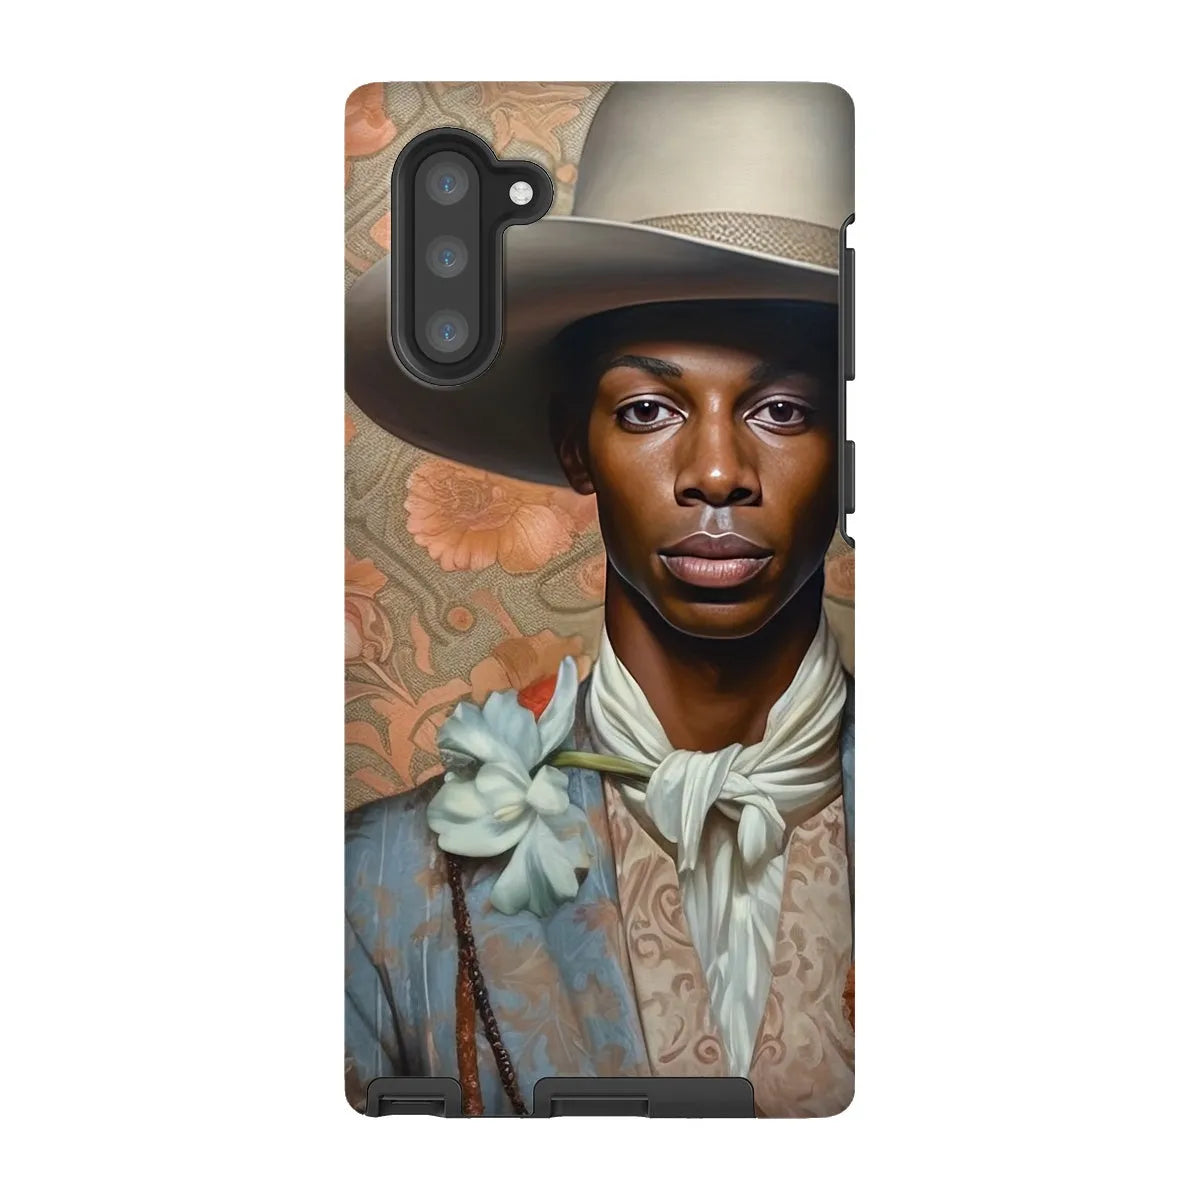 Apollo The Gay Cowboy - Gay Aesthetic Art Phone Case - Samsung Galaxy Note 10 / Matte - Mobile Phone Cases - Aesthetic